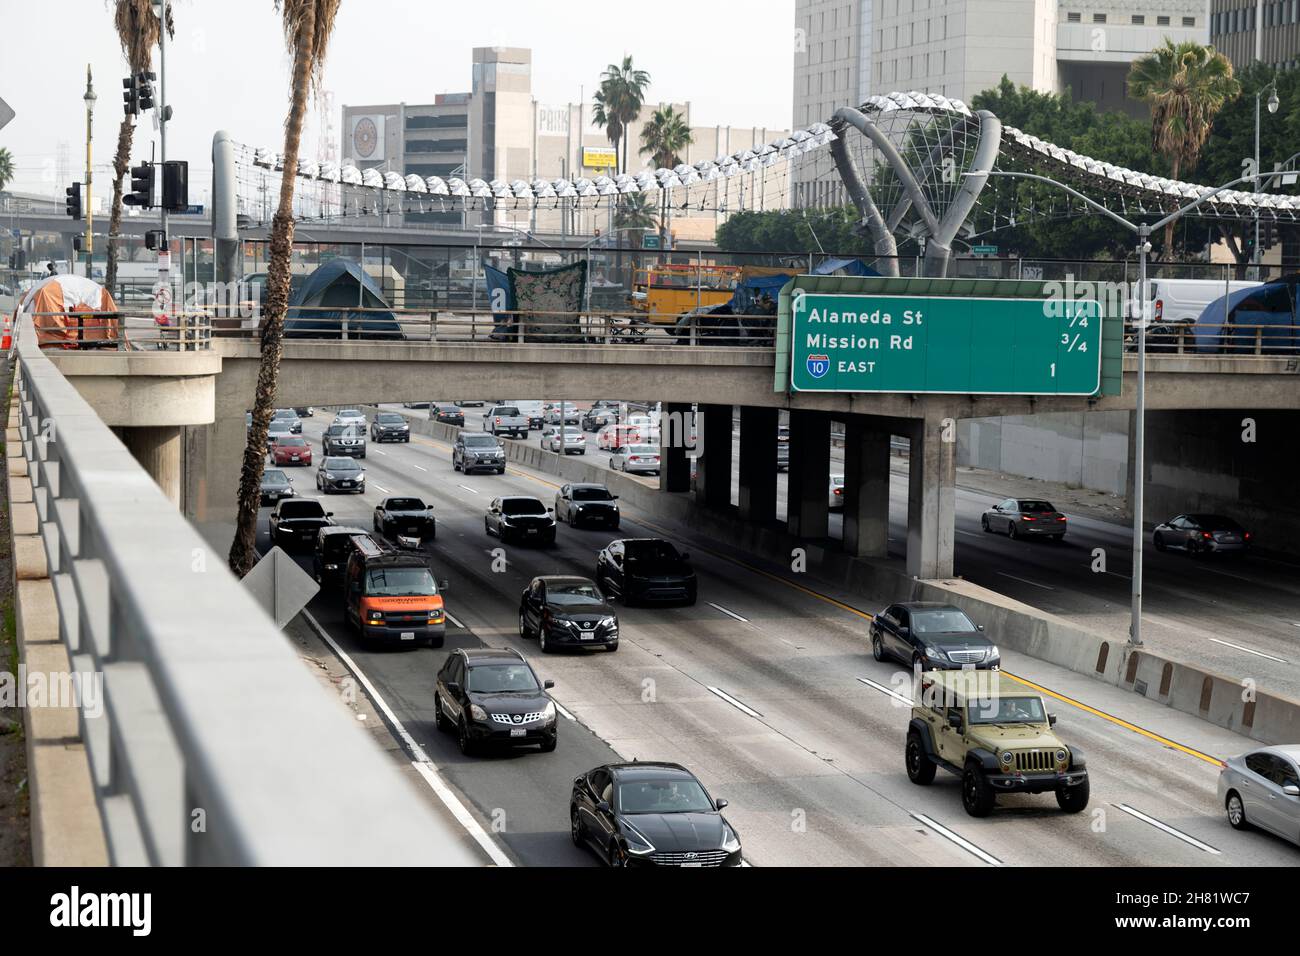 Los Angeles, CA USA - November 19, 2021: A homeless encampment on a bridge over the  busy 101 freeway in downtown Los Angeles Stock Photo